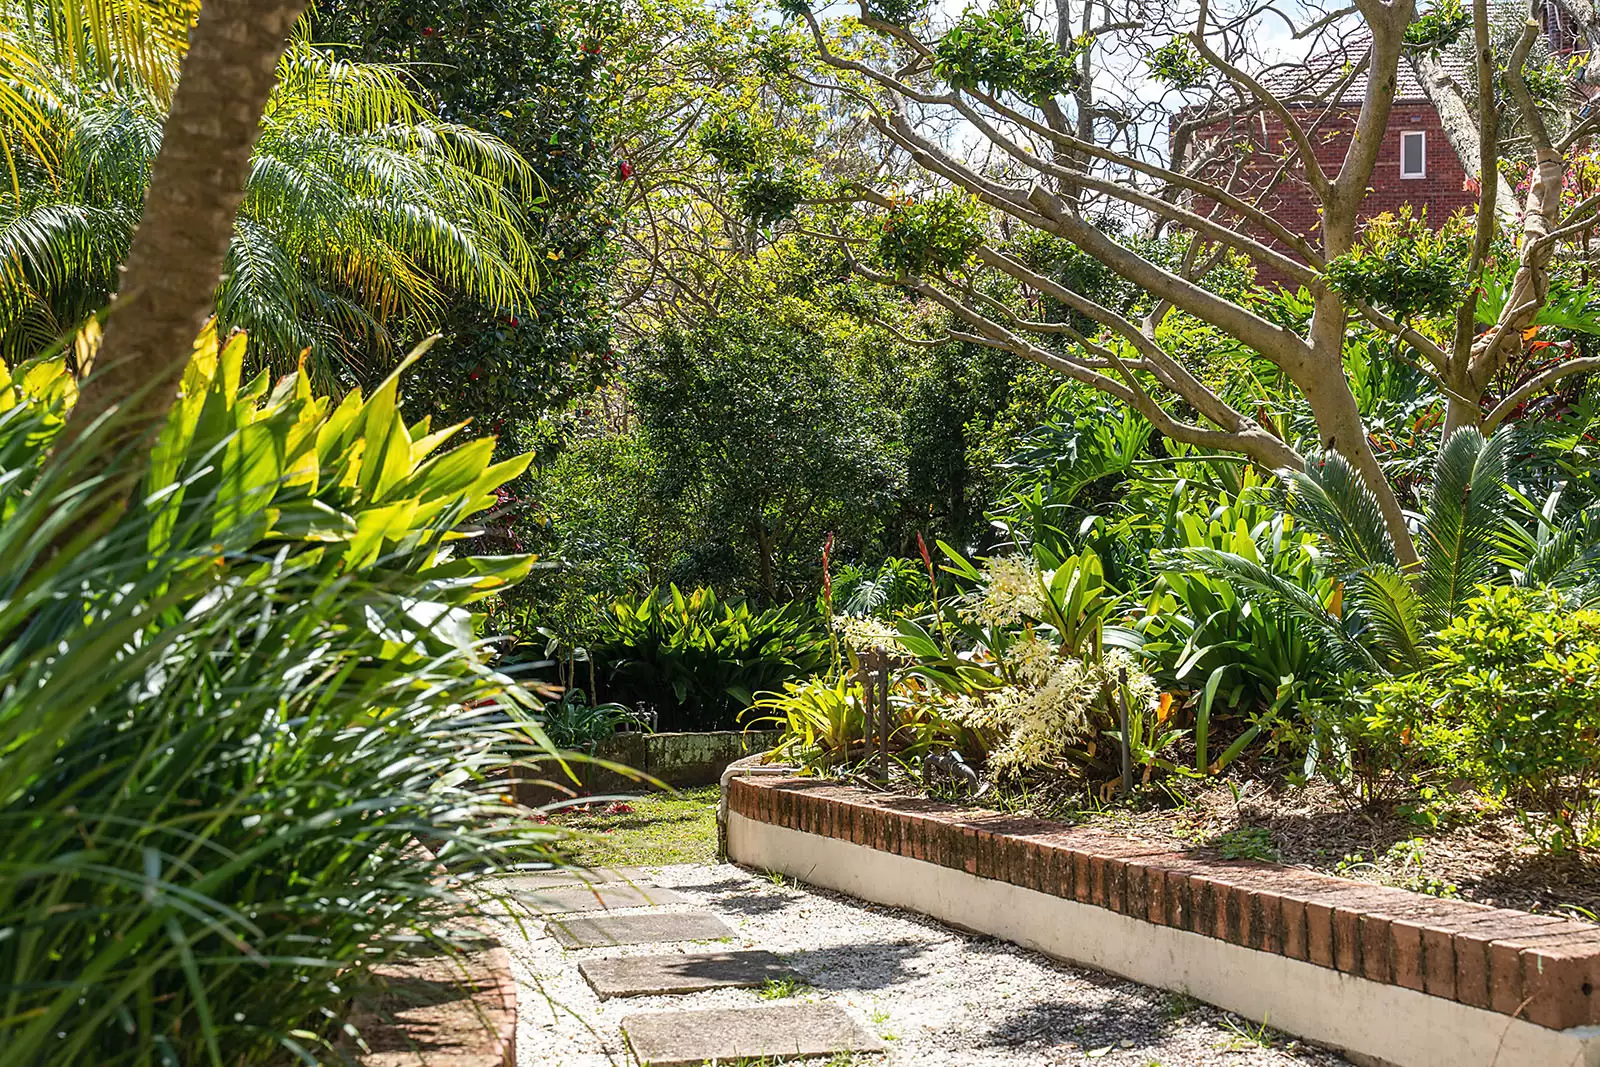 Photo #17: 67/11 Yarranabbe Road, Darling Point - For Sale by Sydney Sotheby's International Realty